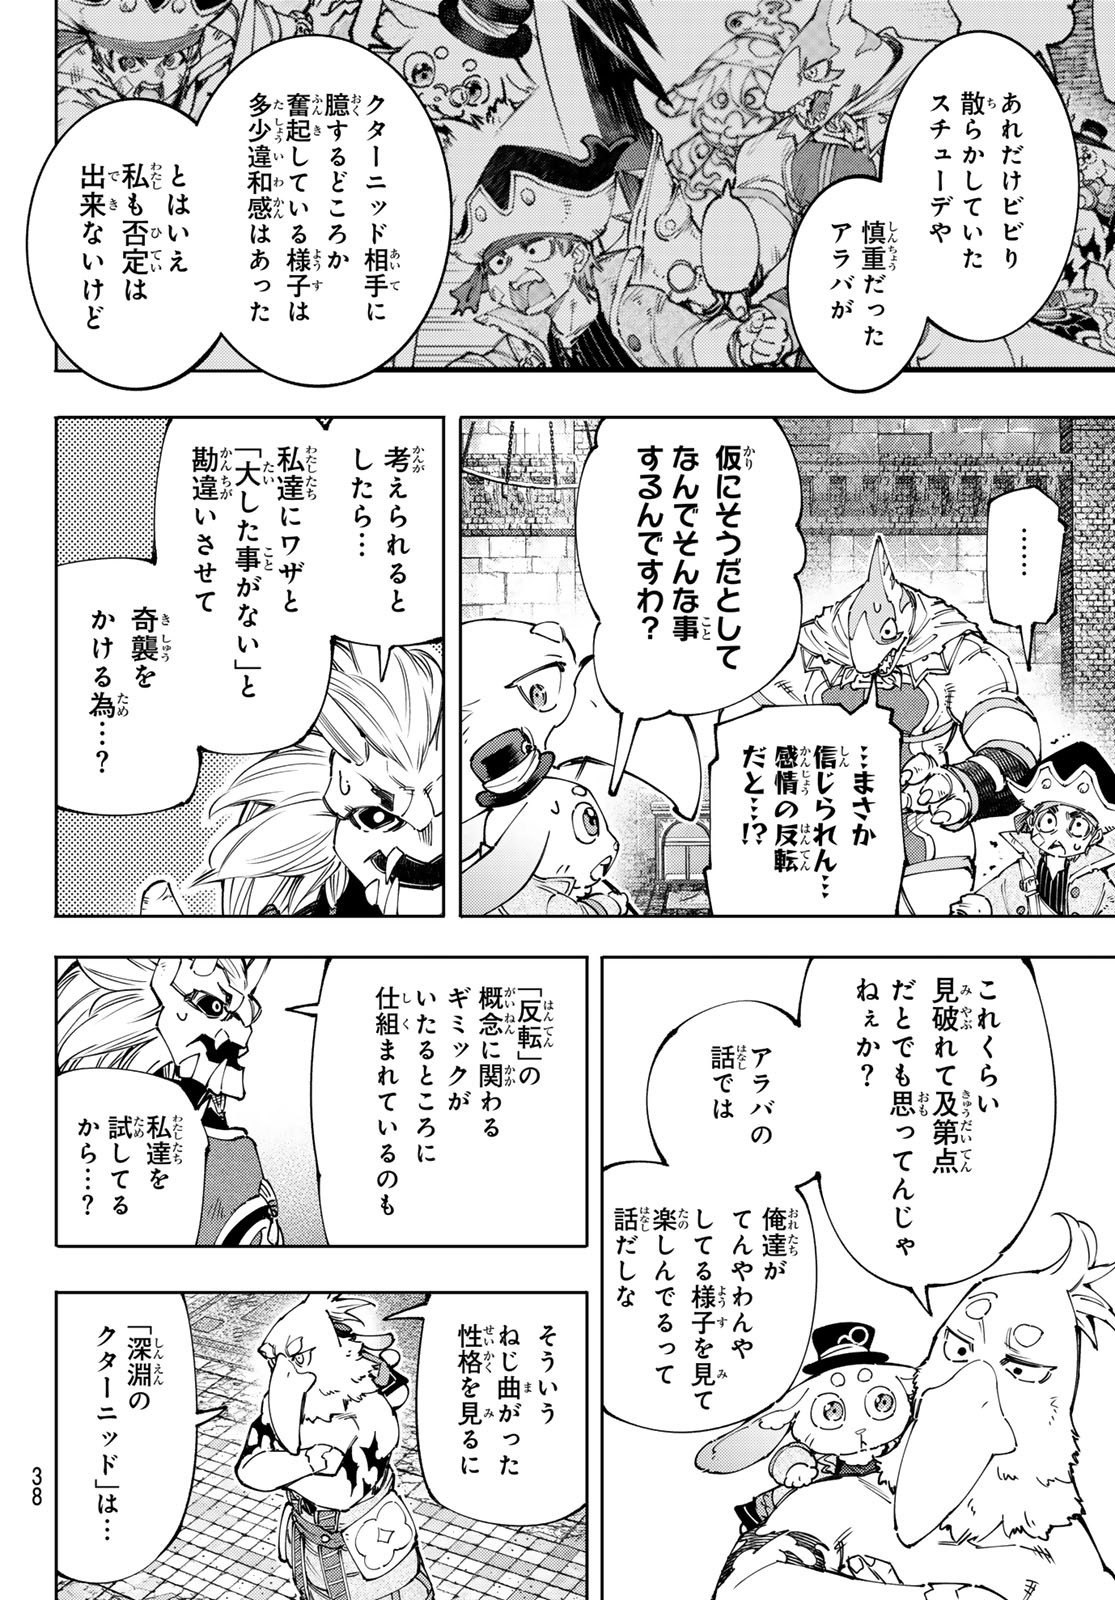 Weekly Shōnen Magazine - 週刊少年マガジン - Chapter 2024-24 - Page 38